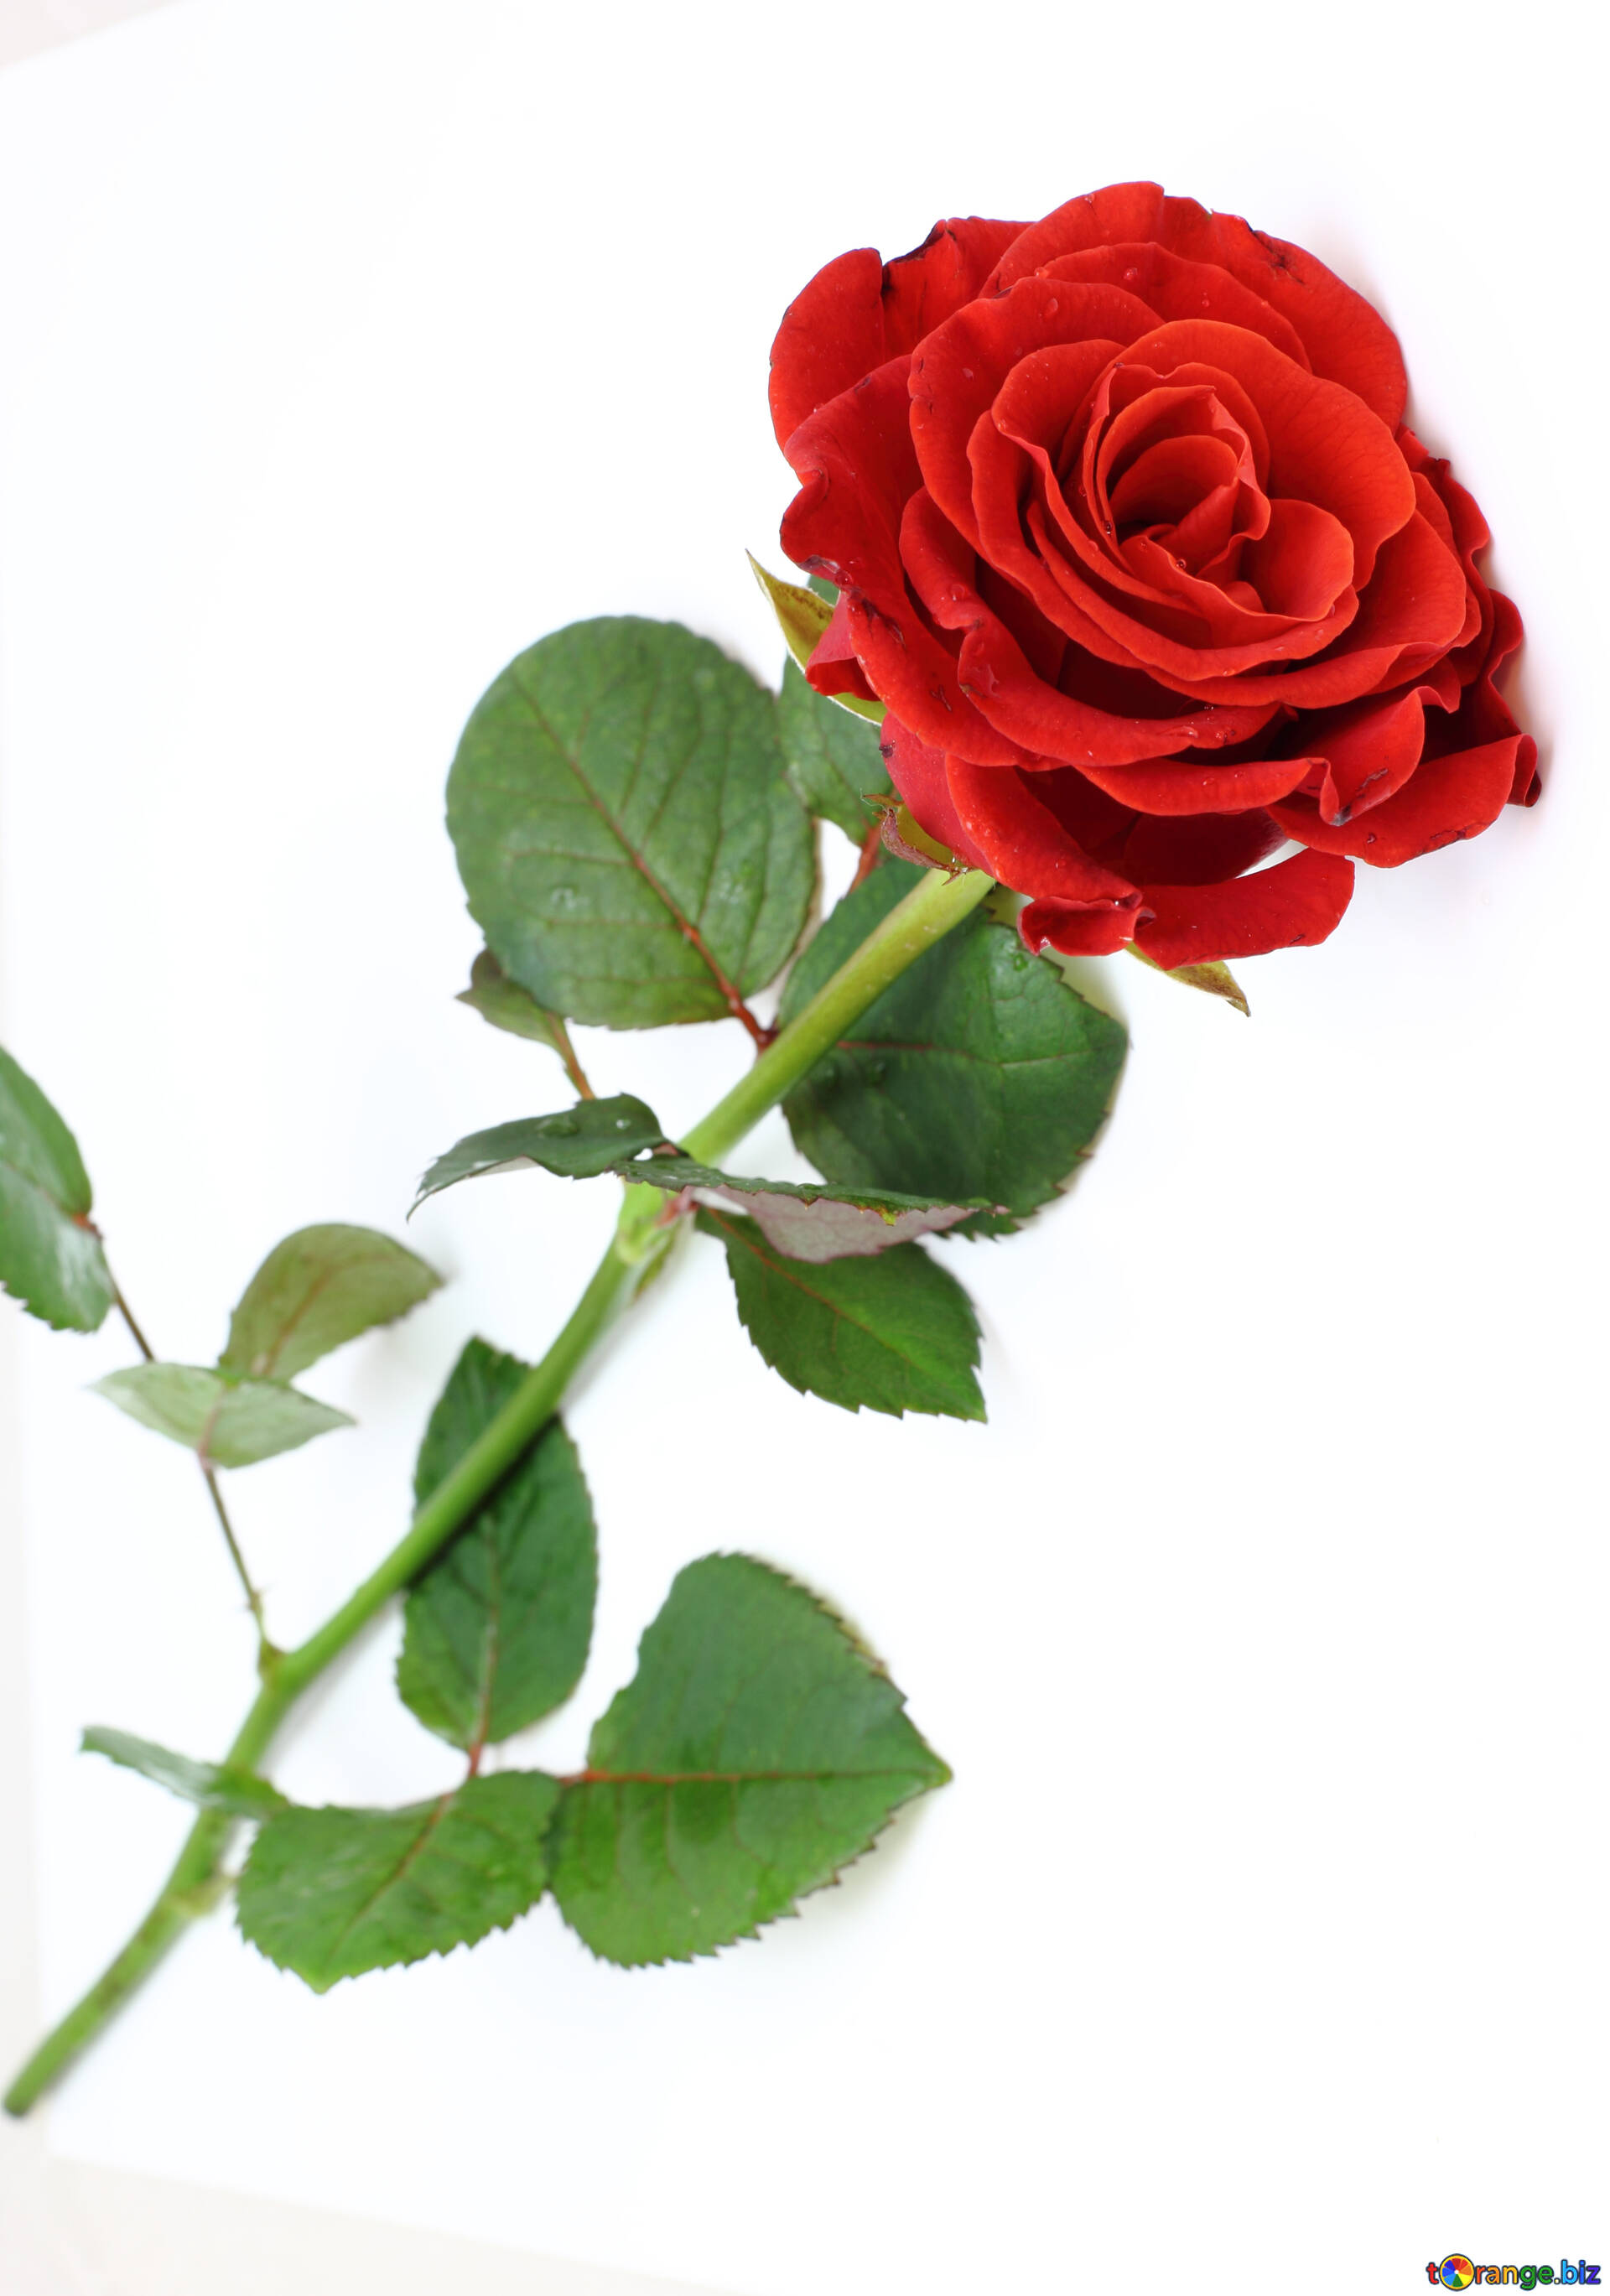 Flowers Roses Isolated Image Red Beautiful Rose Images Rose Flower